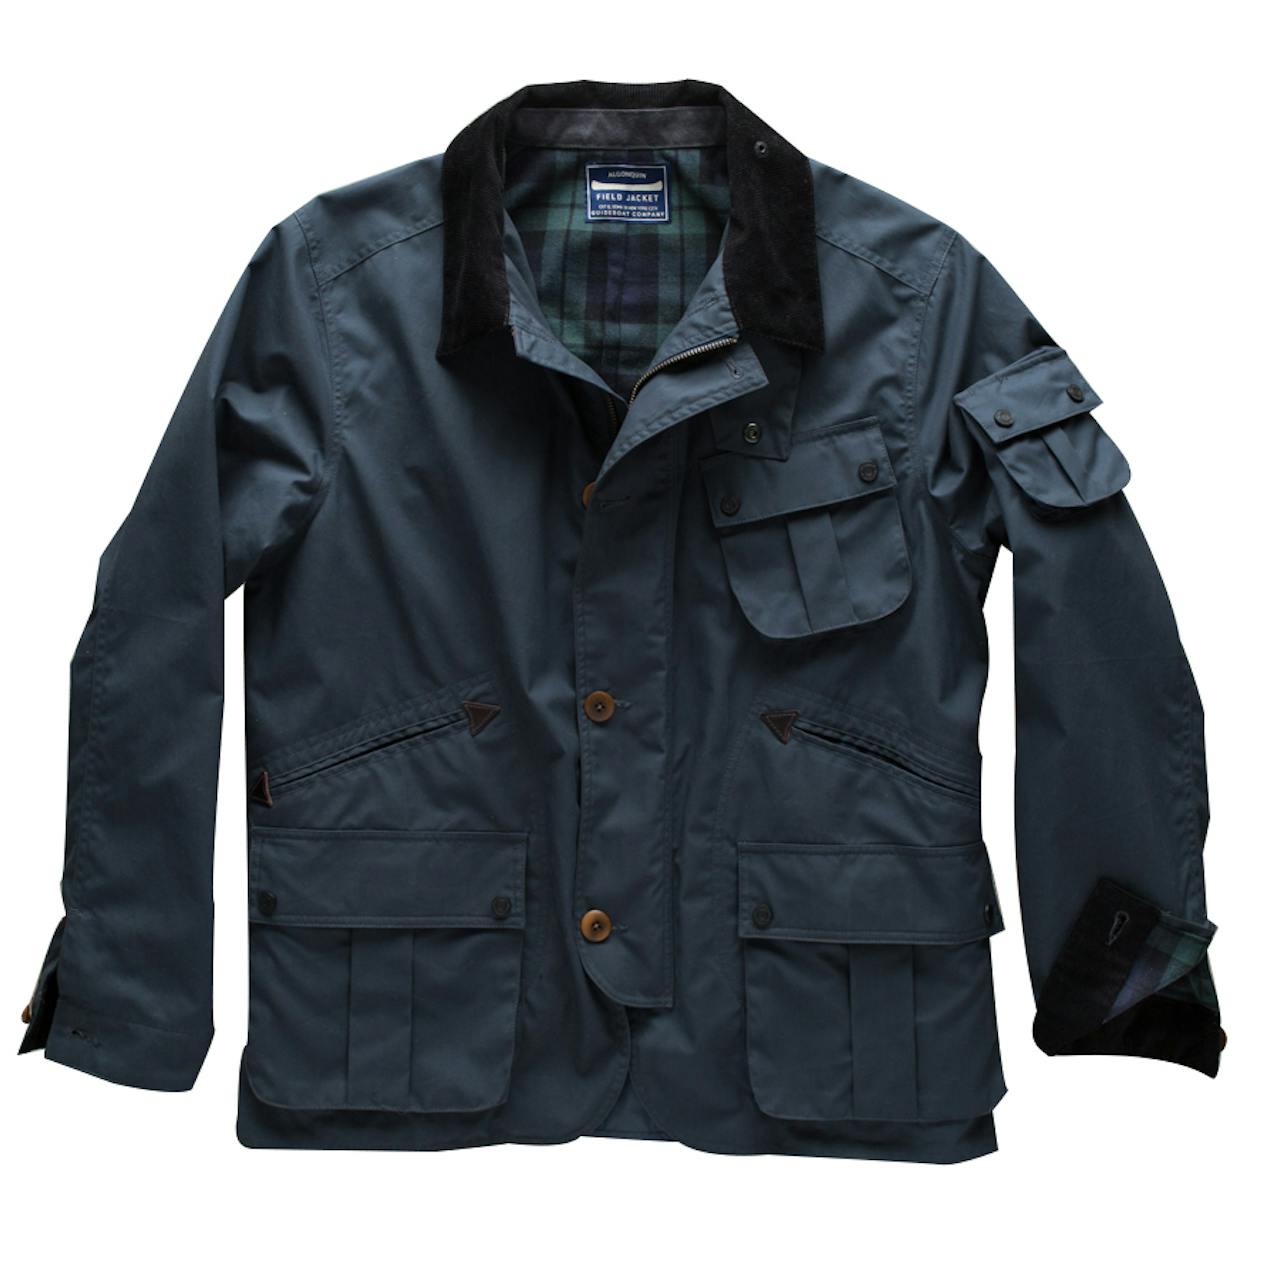 Guideboat Co. The Algonquin Field Jacket